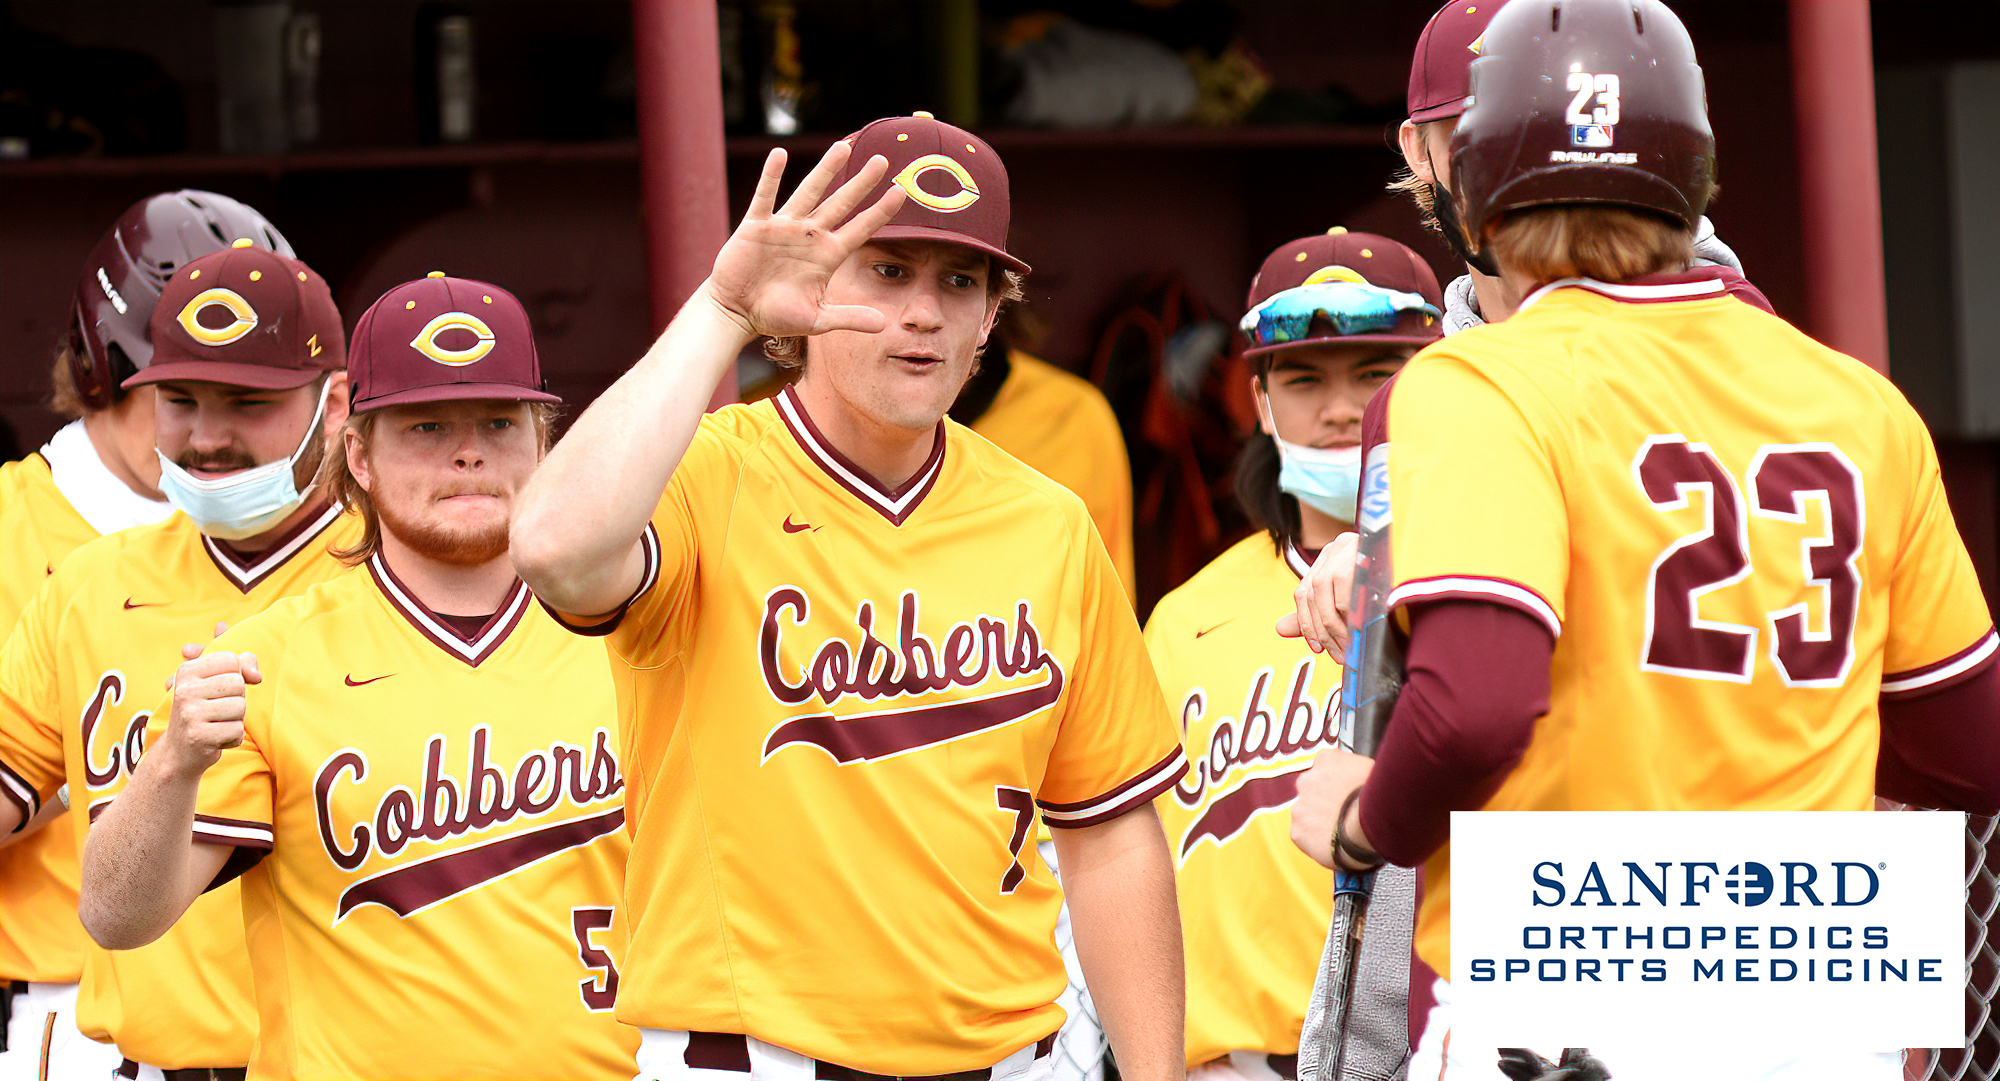 Sean McGuire (center #7) was 4-for-4, drove in two runs and scored two runs in the Cobbers' upset bid against DI NDSU.